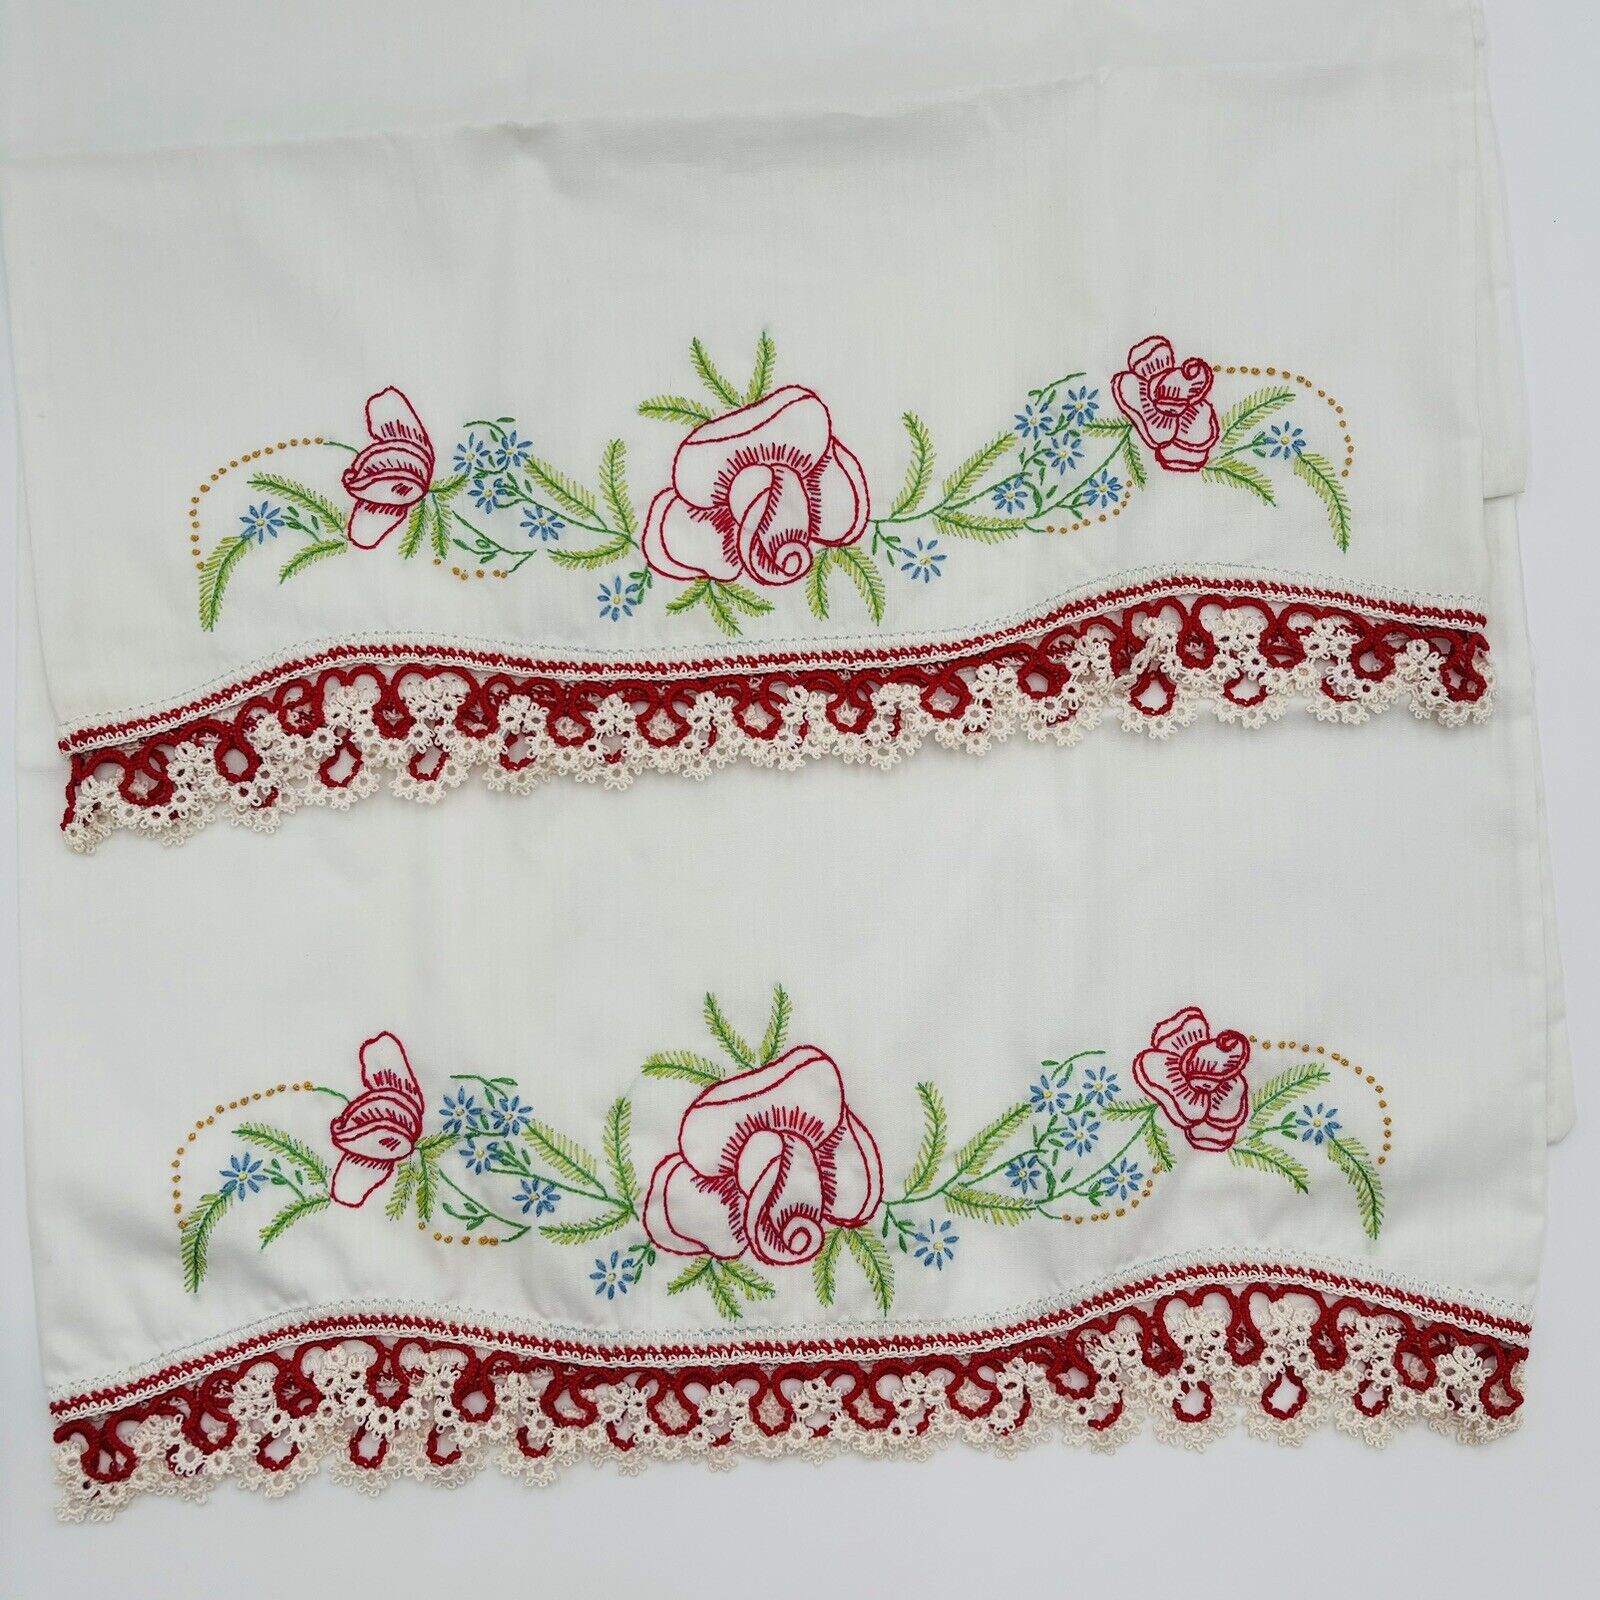 2 Vintage Cotton Pillowcases Embroidered Red Rose Blue Flowers Crochet Lace Trim